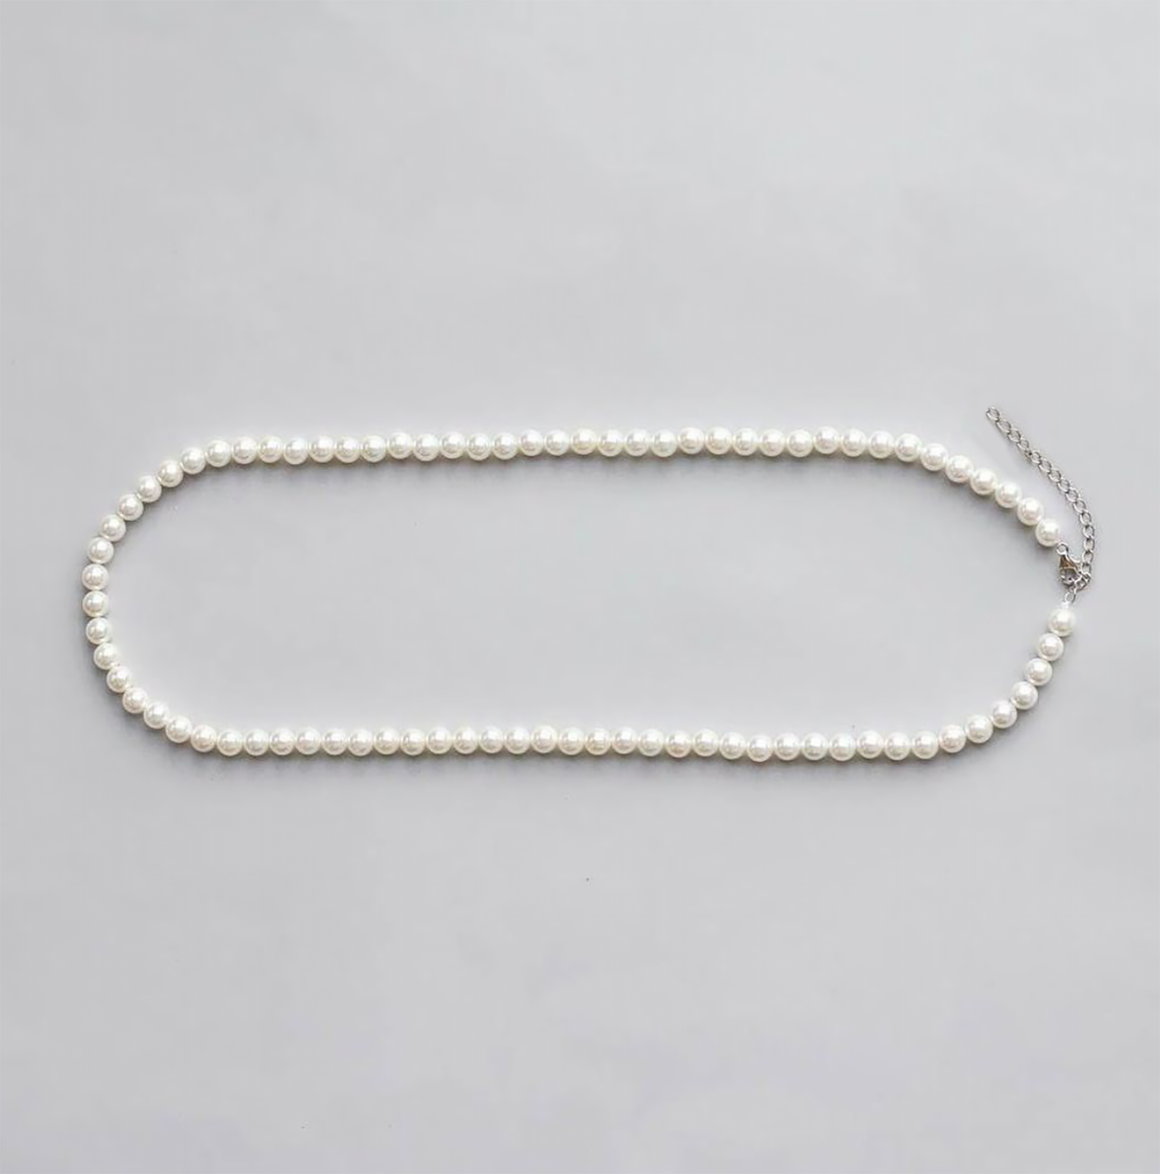 54 FLORAL 8mm PEARL NECKLACE BEAD NECKLACE CHAIN - WHITE